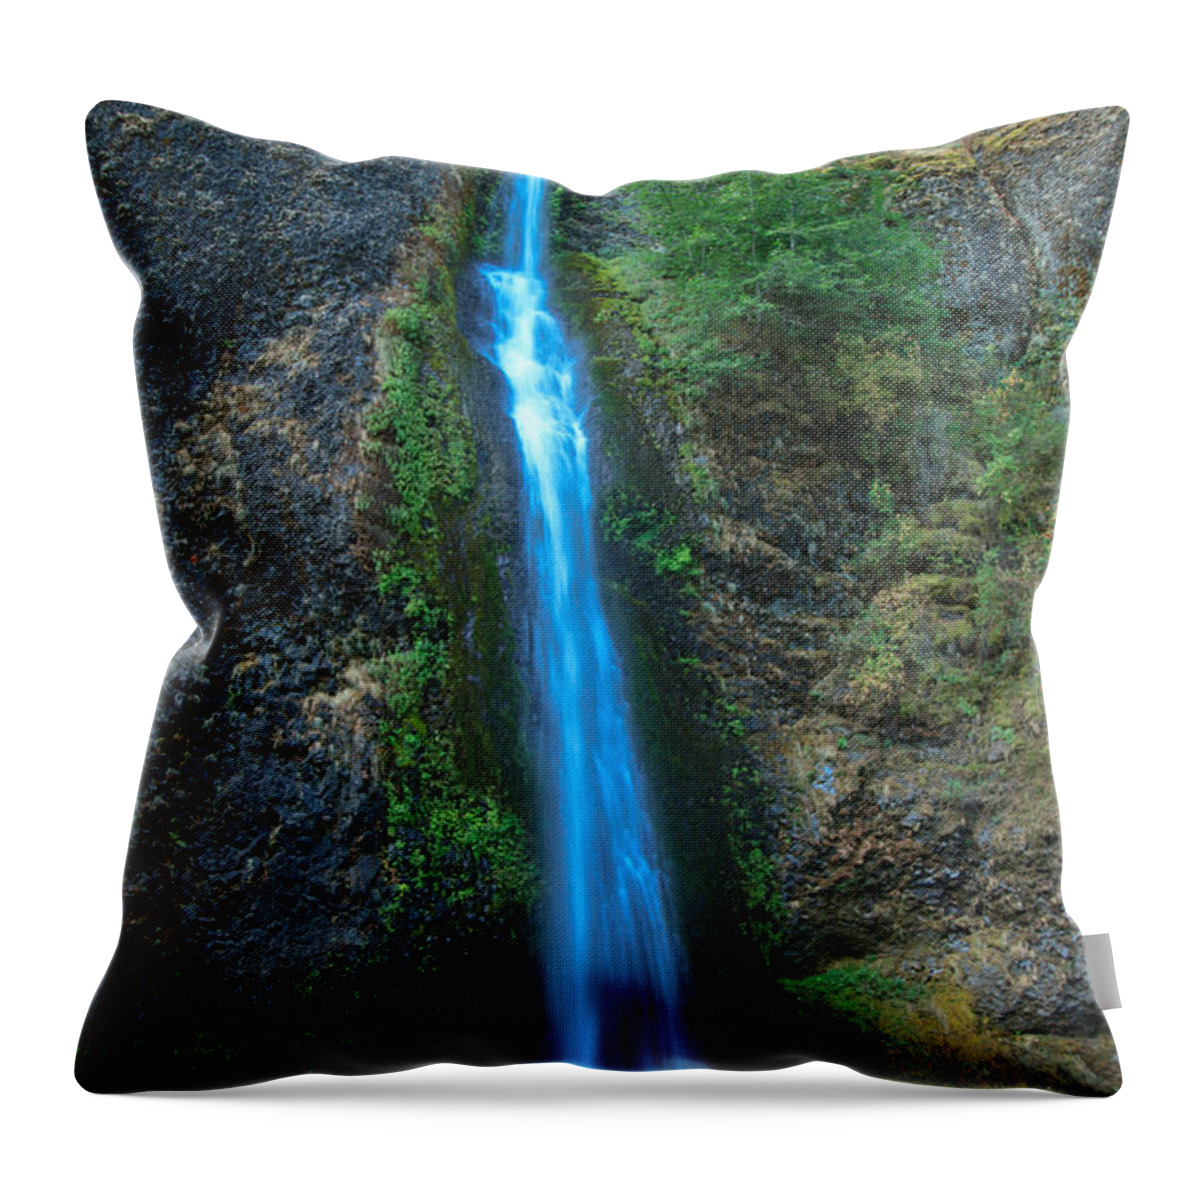 River Throw Pillow featuring the photograph Horsetail Falls by Robert Bales